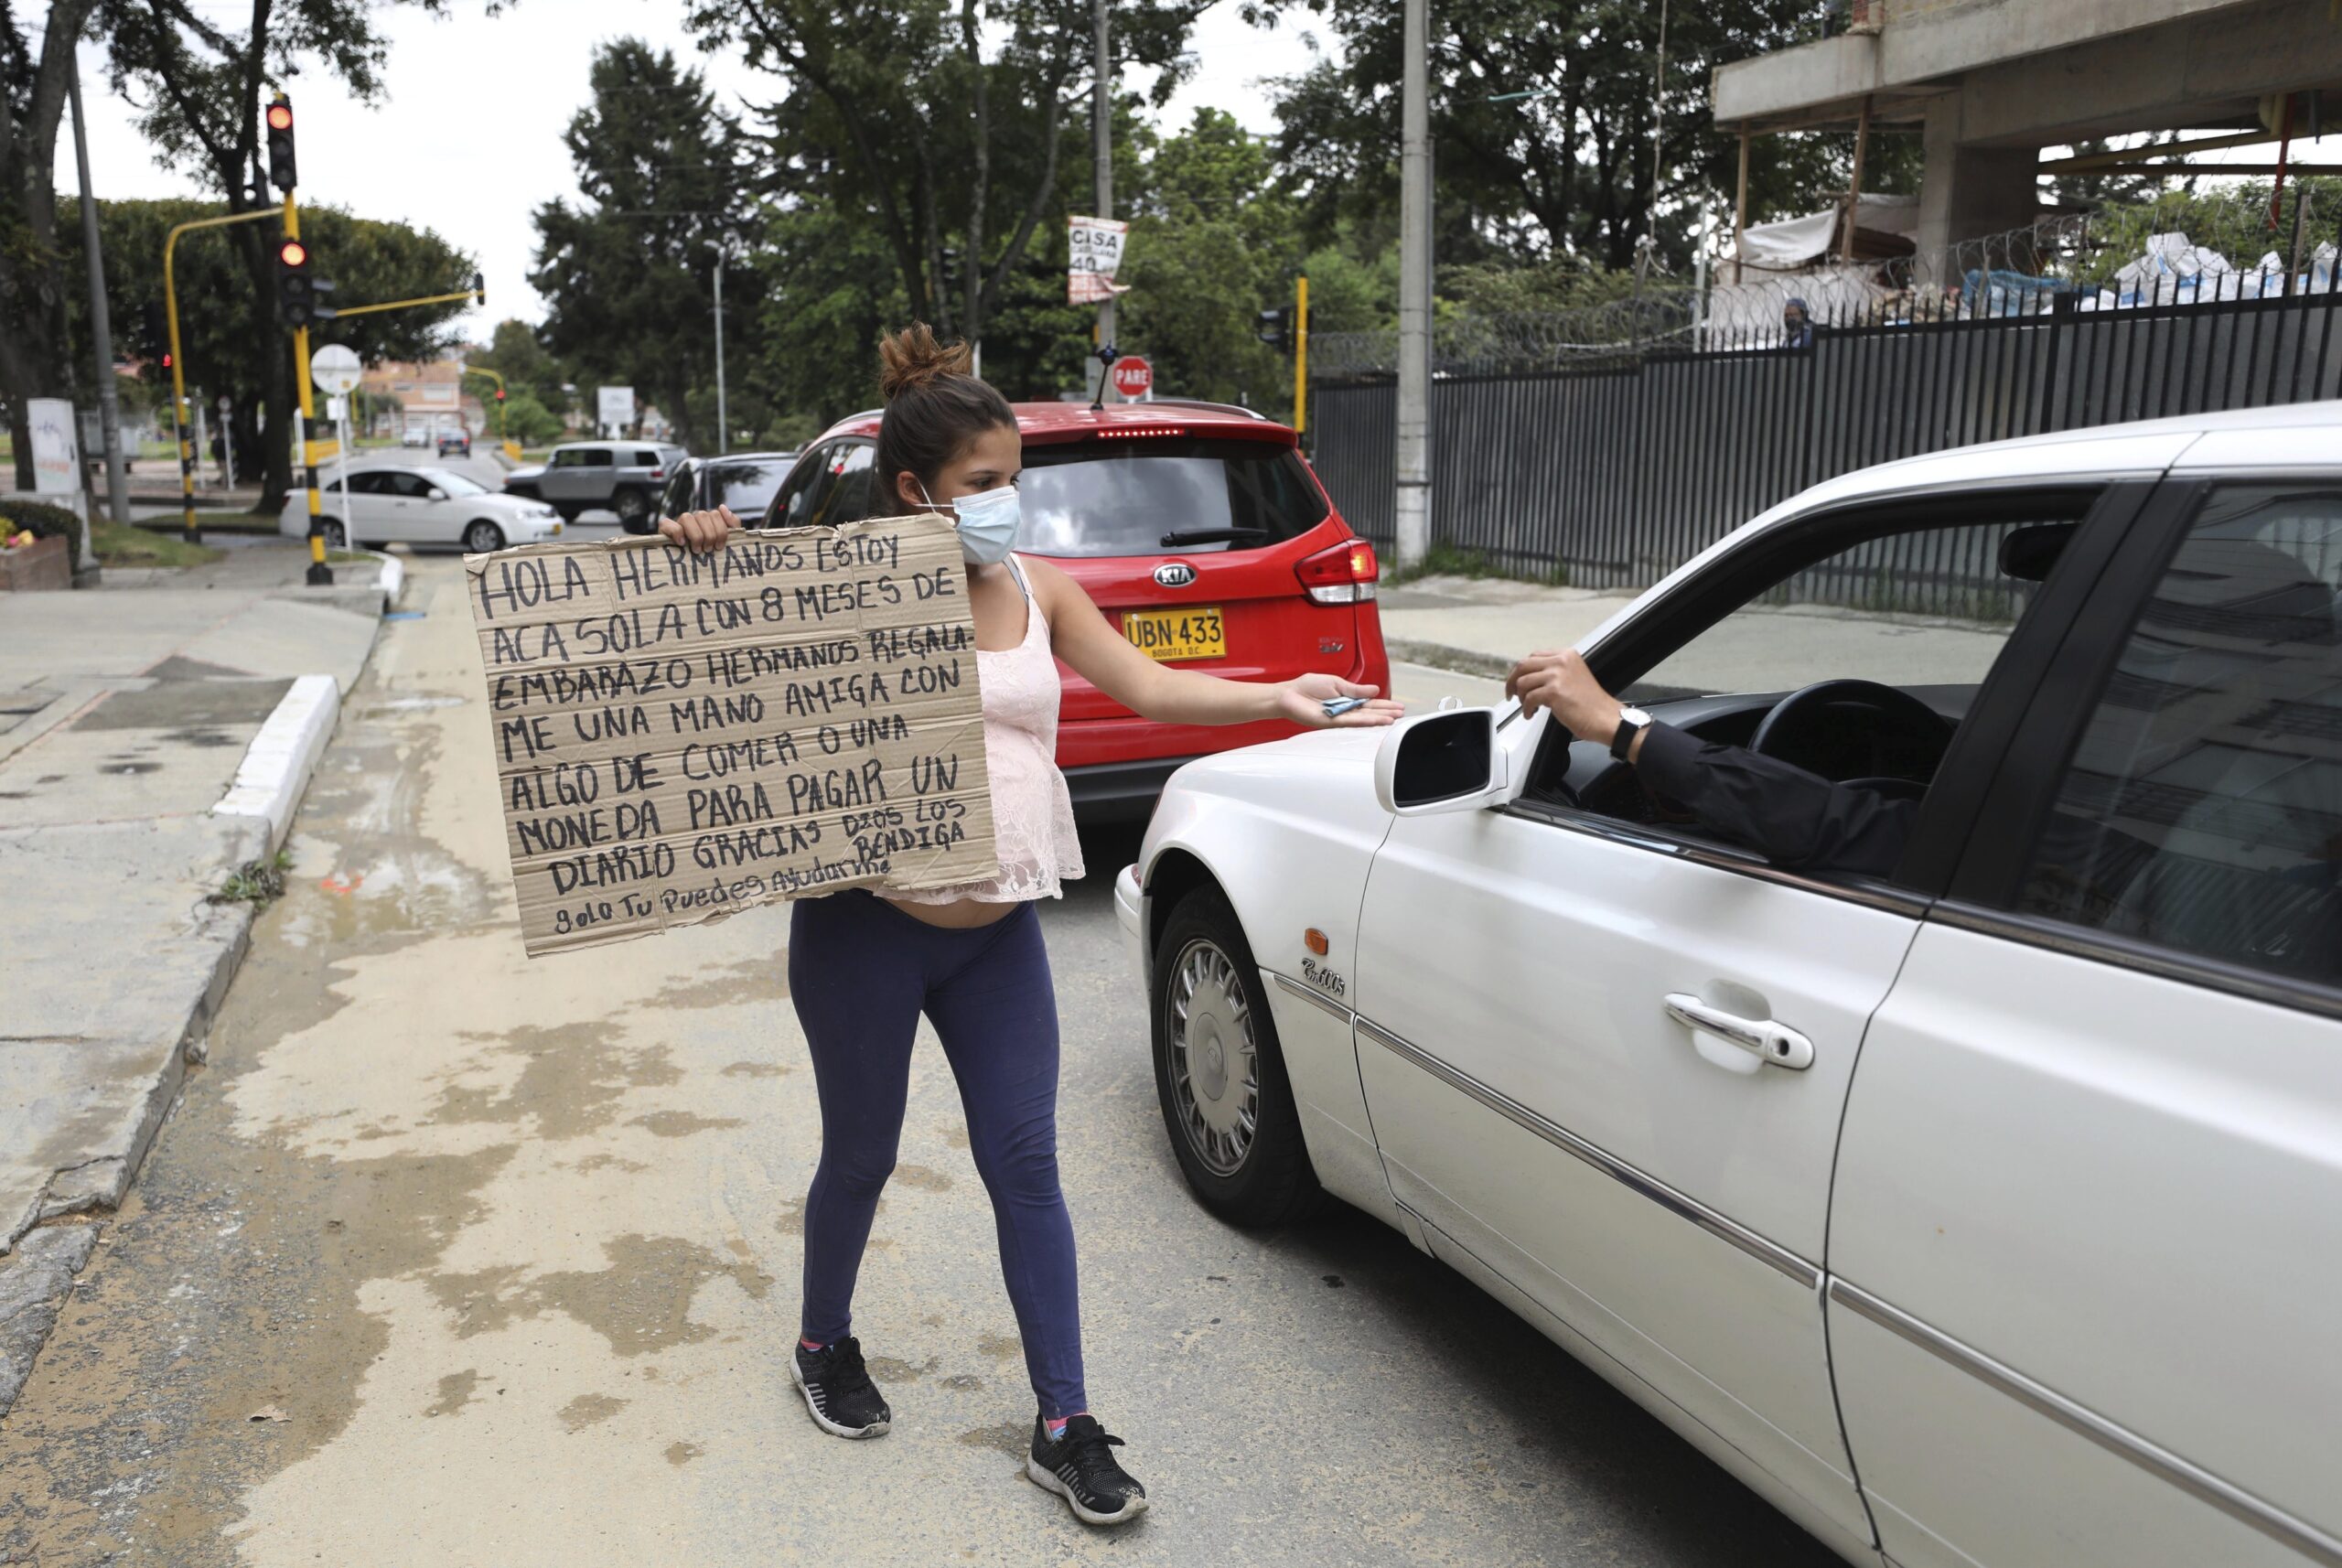 A pregnent woman holds a sign asking for food or money and reaches toward a car